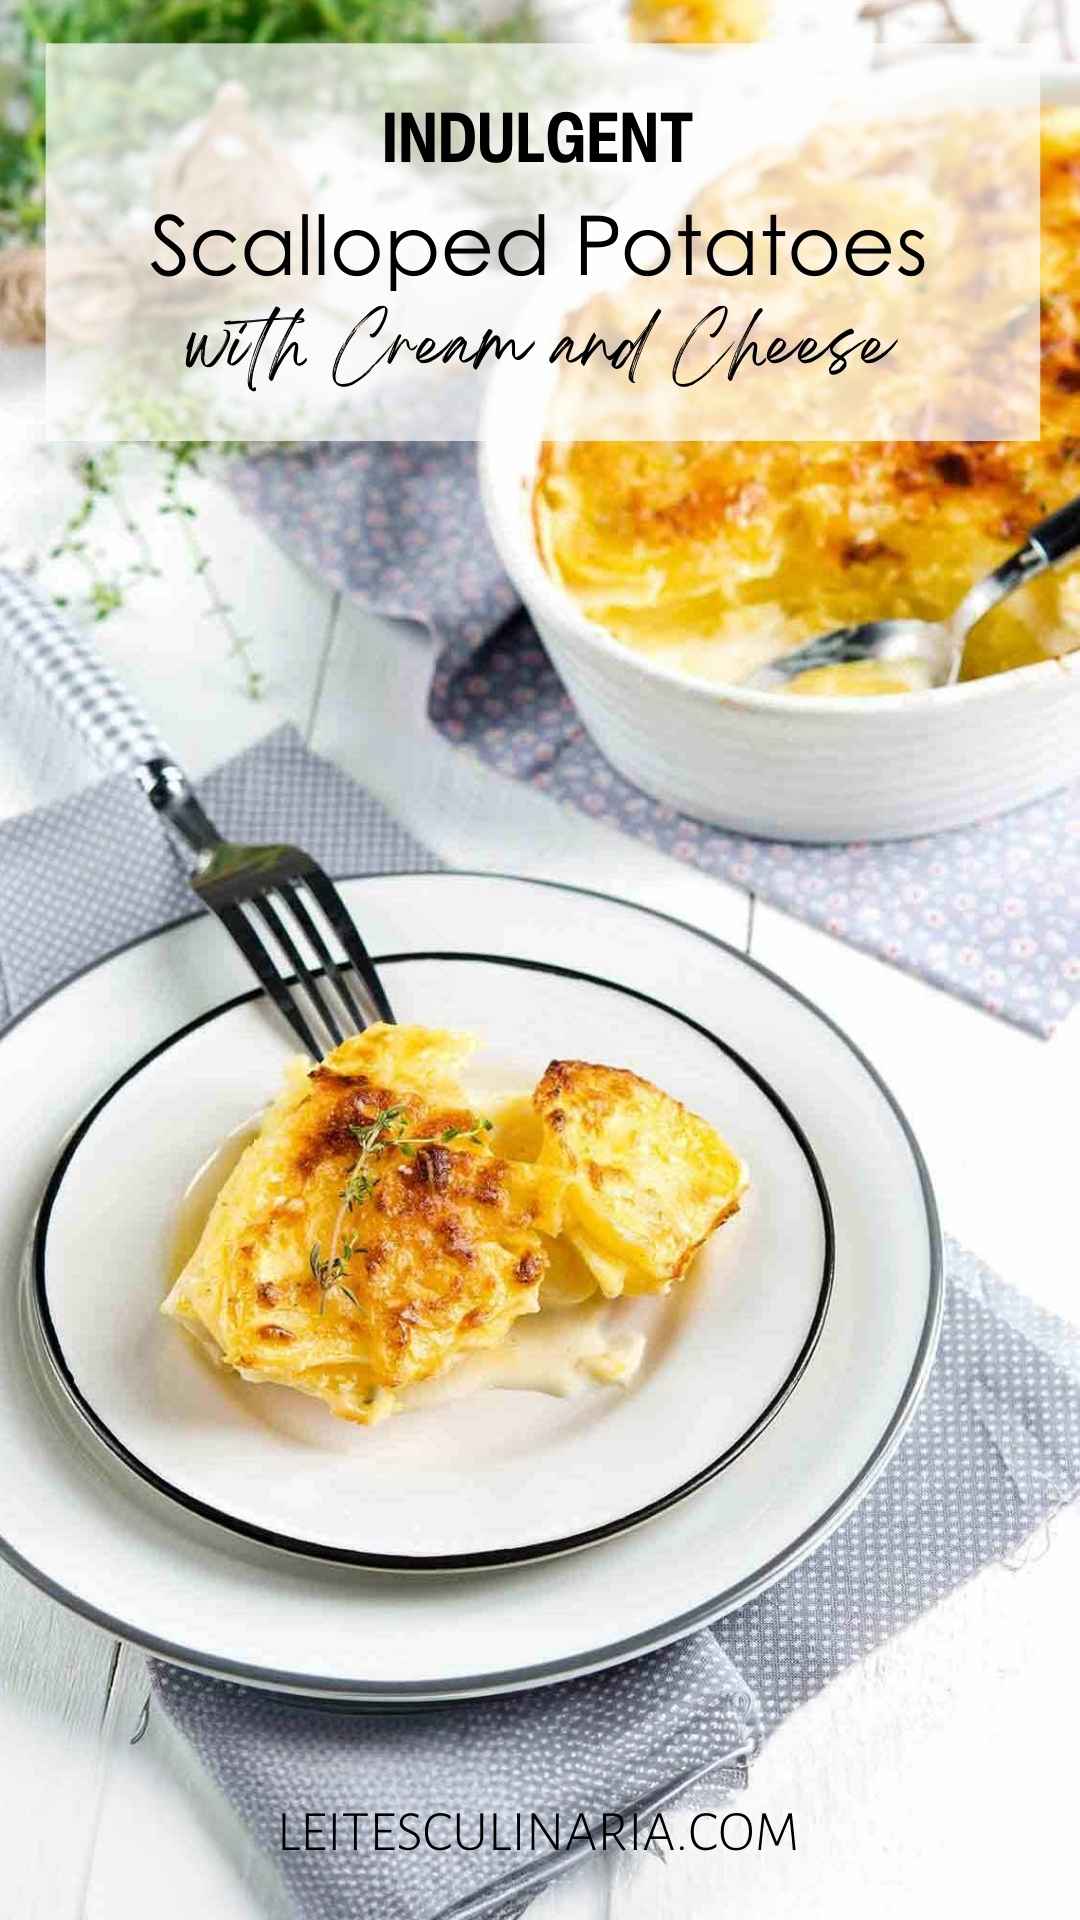 A round baking dish filled with scalloped potatoes and two stacked white plates topped with a serving of the scalloped potatoes.